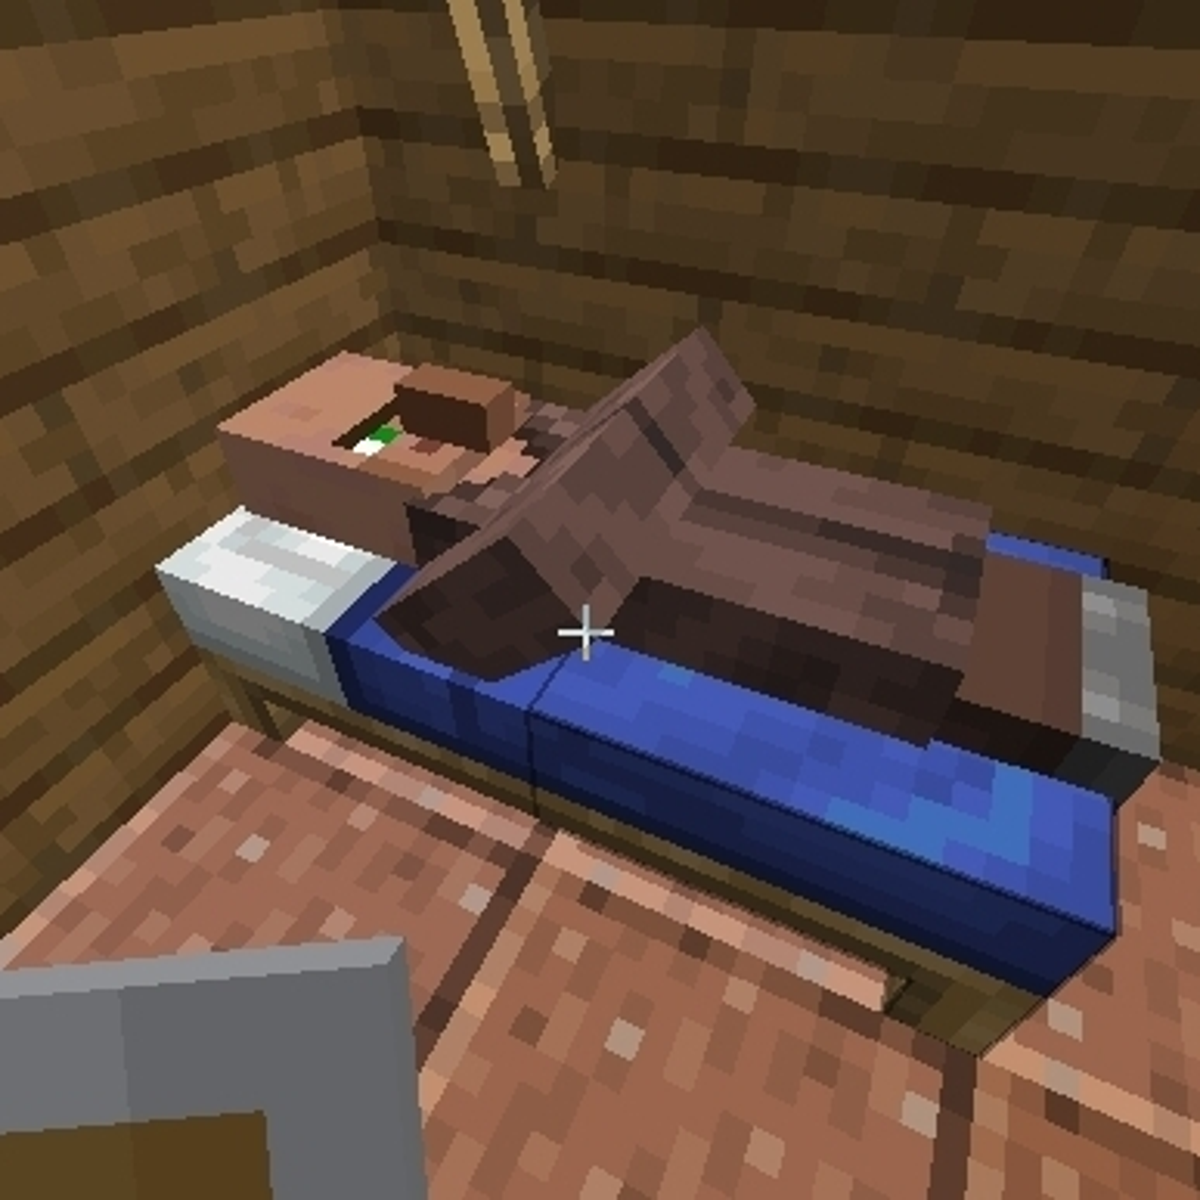 Can villagers claim your bed?